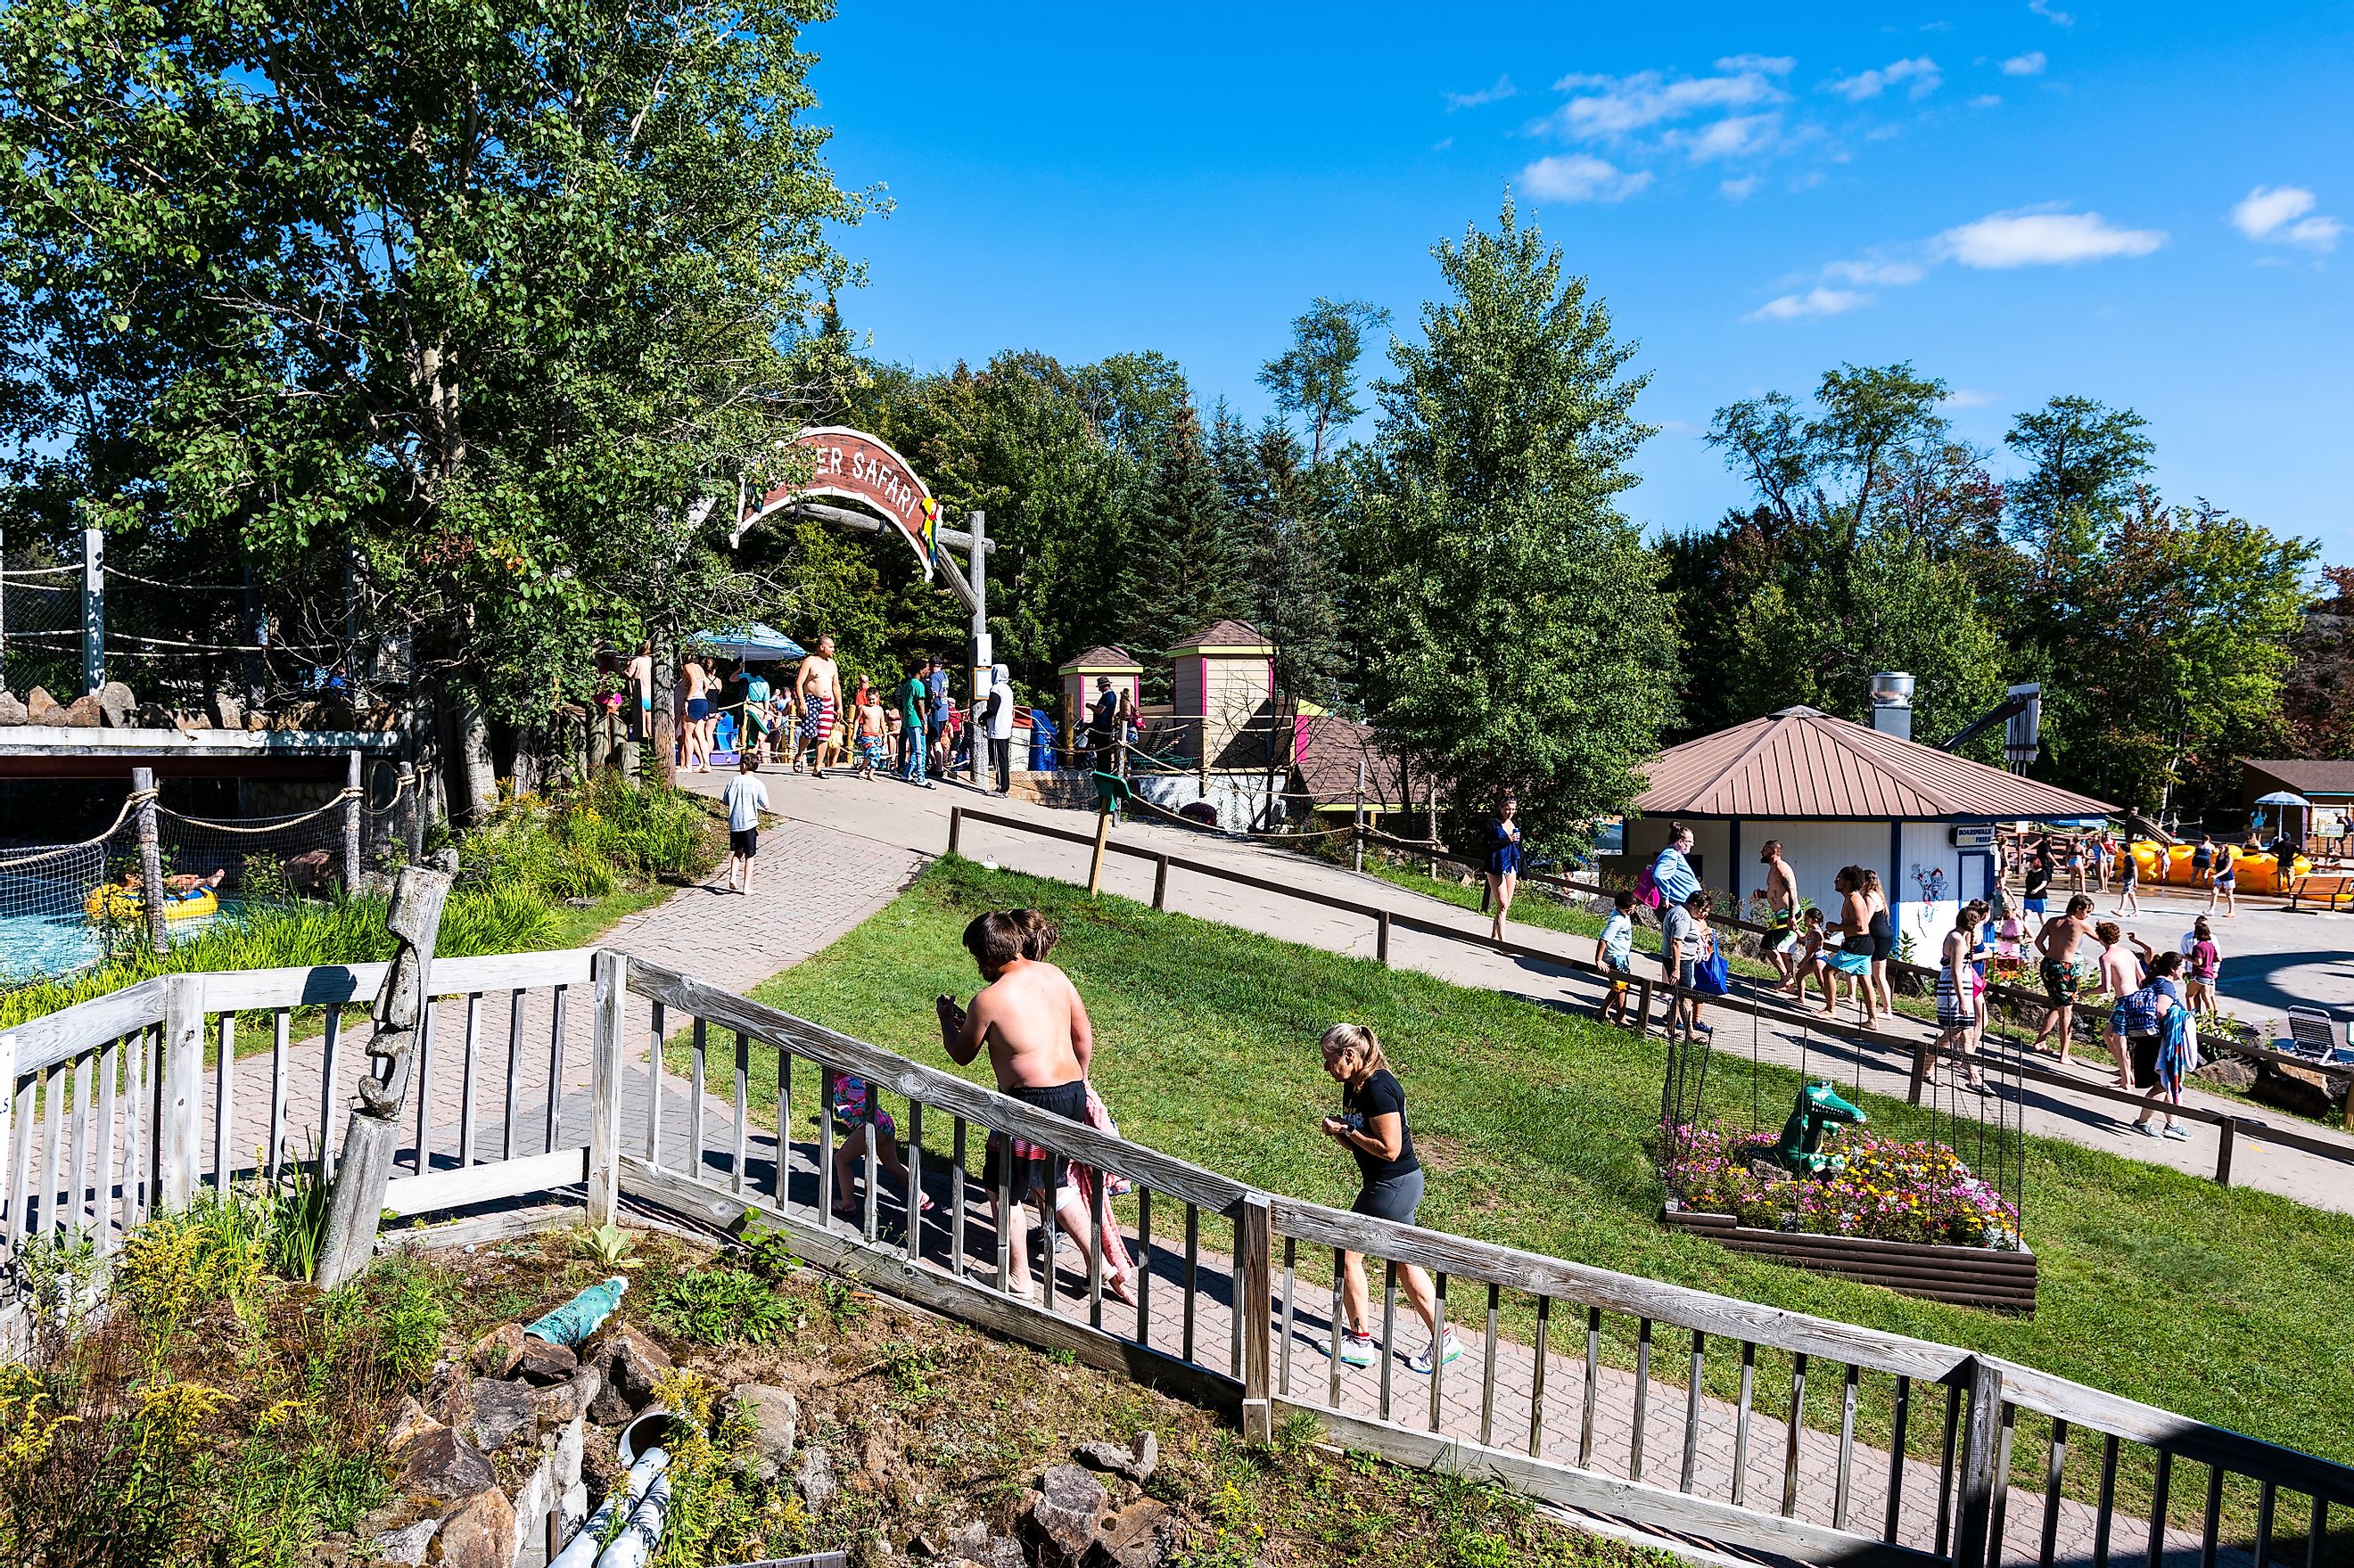 Old Forge, New York - September 4, 2021: Horizontal View of Water Safari Park, known as Old Forge Water Safari in New York State.